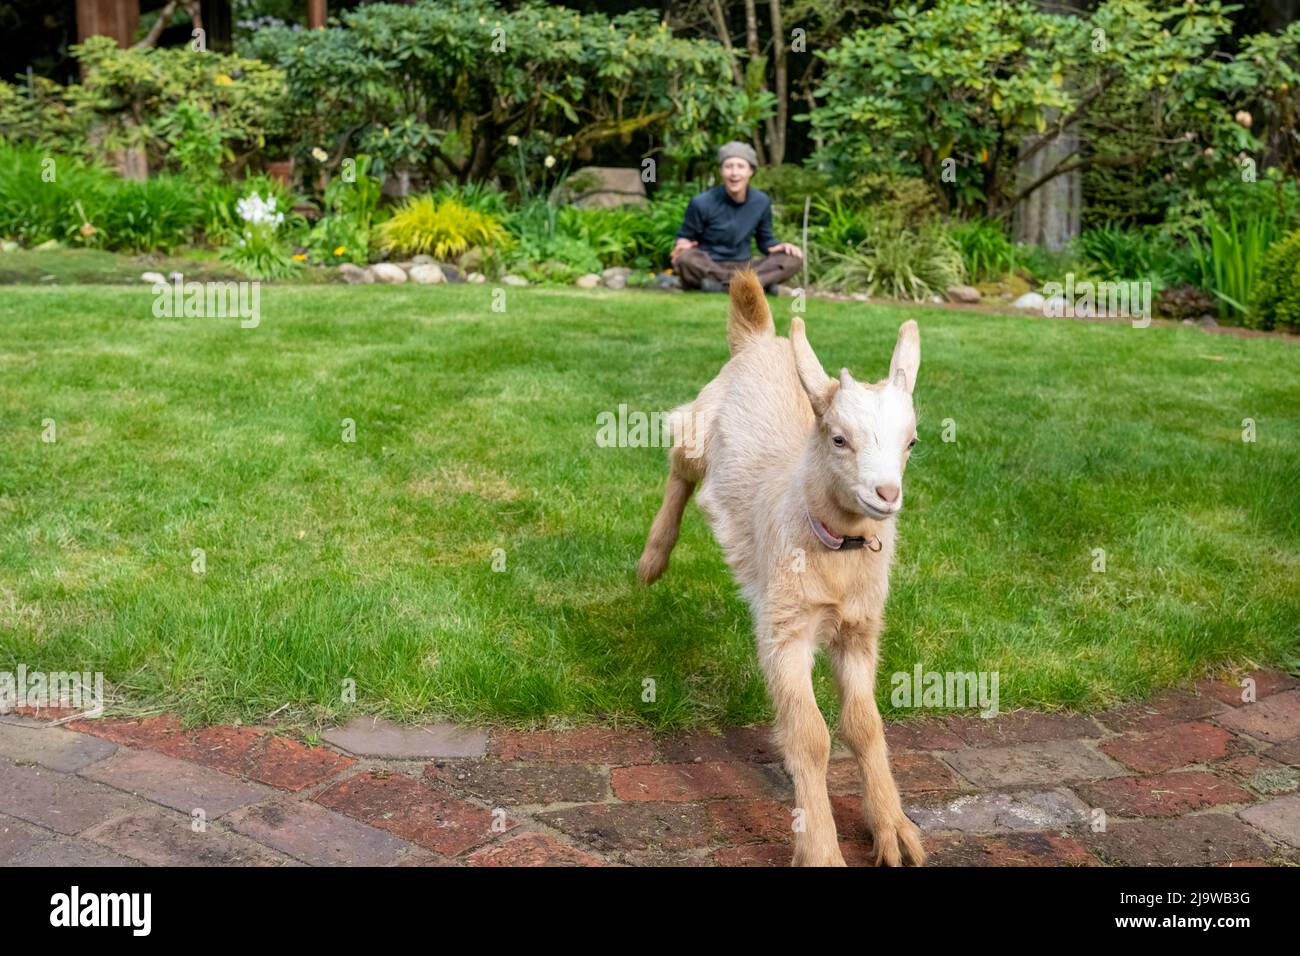 Issaquah, Washington, USA.  Three week old male Guernsey Goat kid running and jumping in a grassy yard with his owner Stock Photo